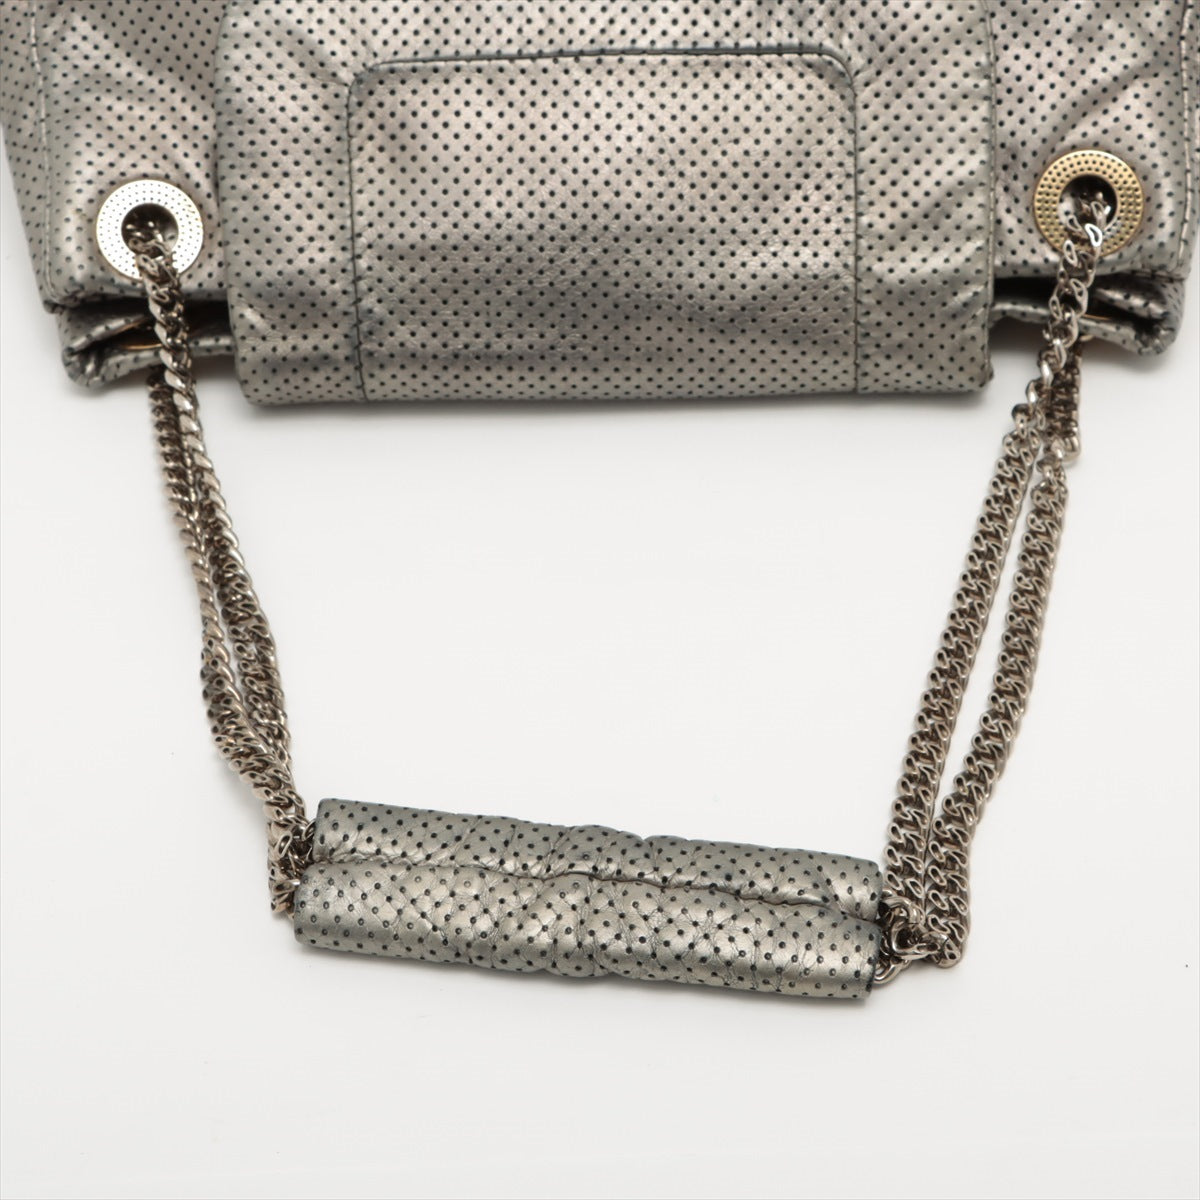 Chanel 2.55 Punching leather Chain Shoulder Bag Silver Gold x Silver Metal Fittings 12XXXXXX